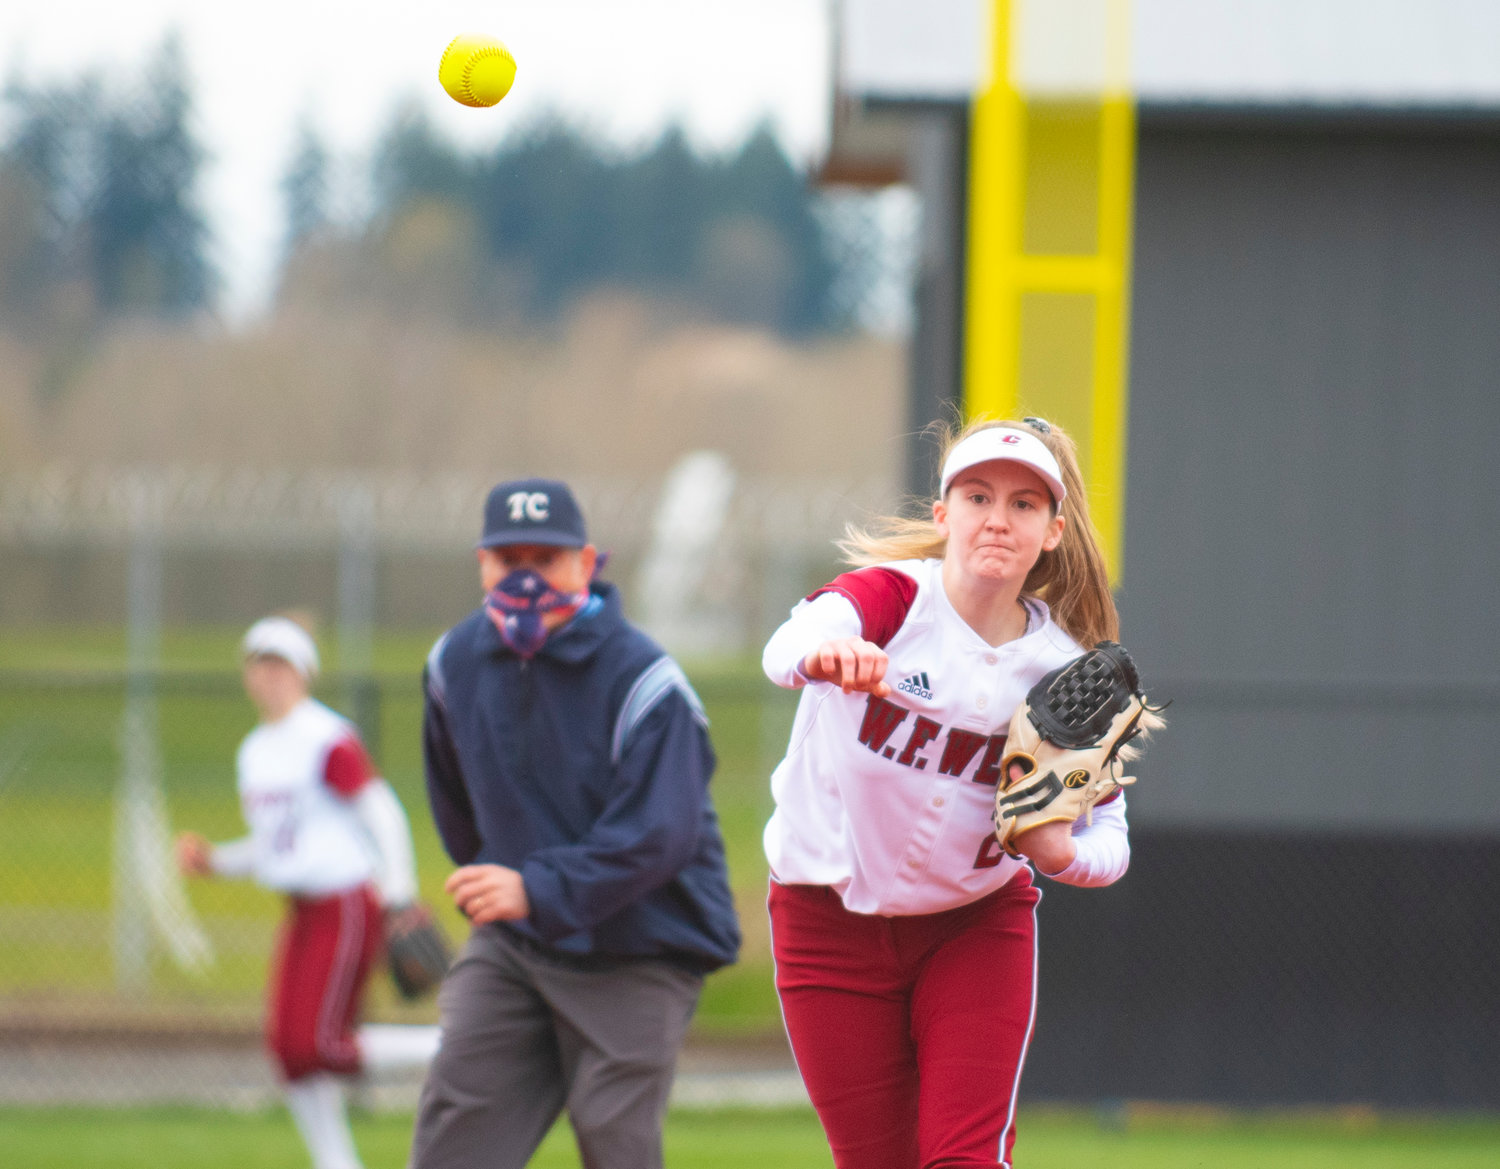 W.F. West shortstop Saige Brindle makes a throw to first base on Wednesday.